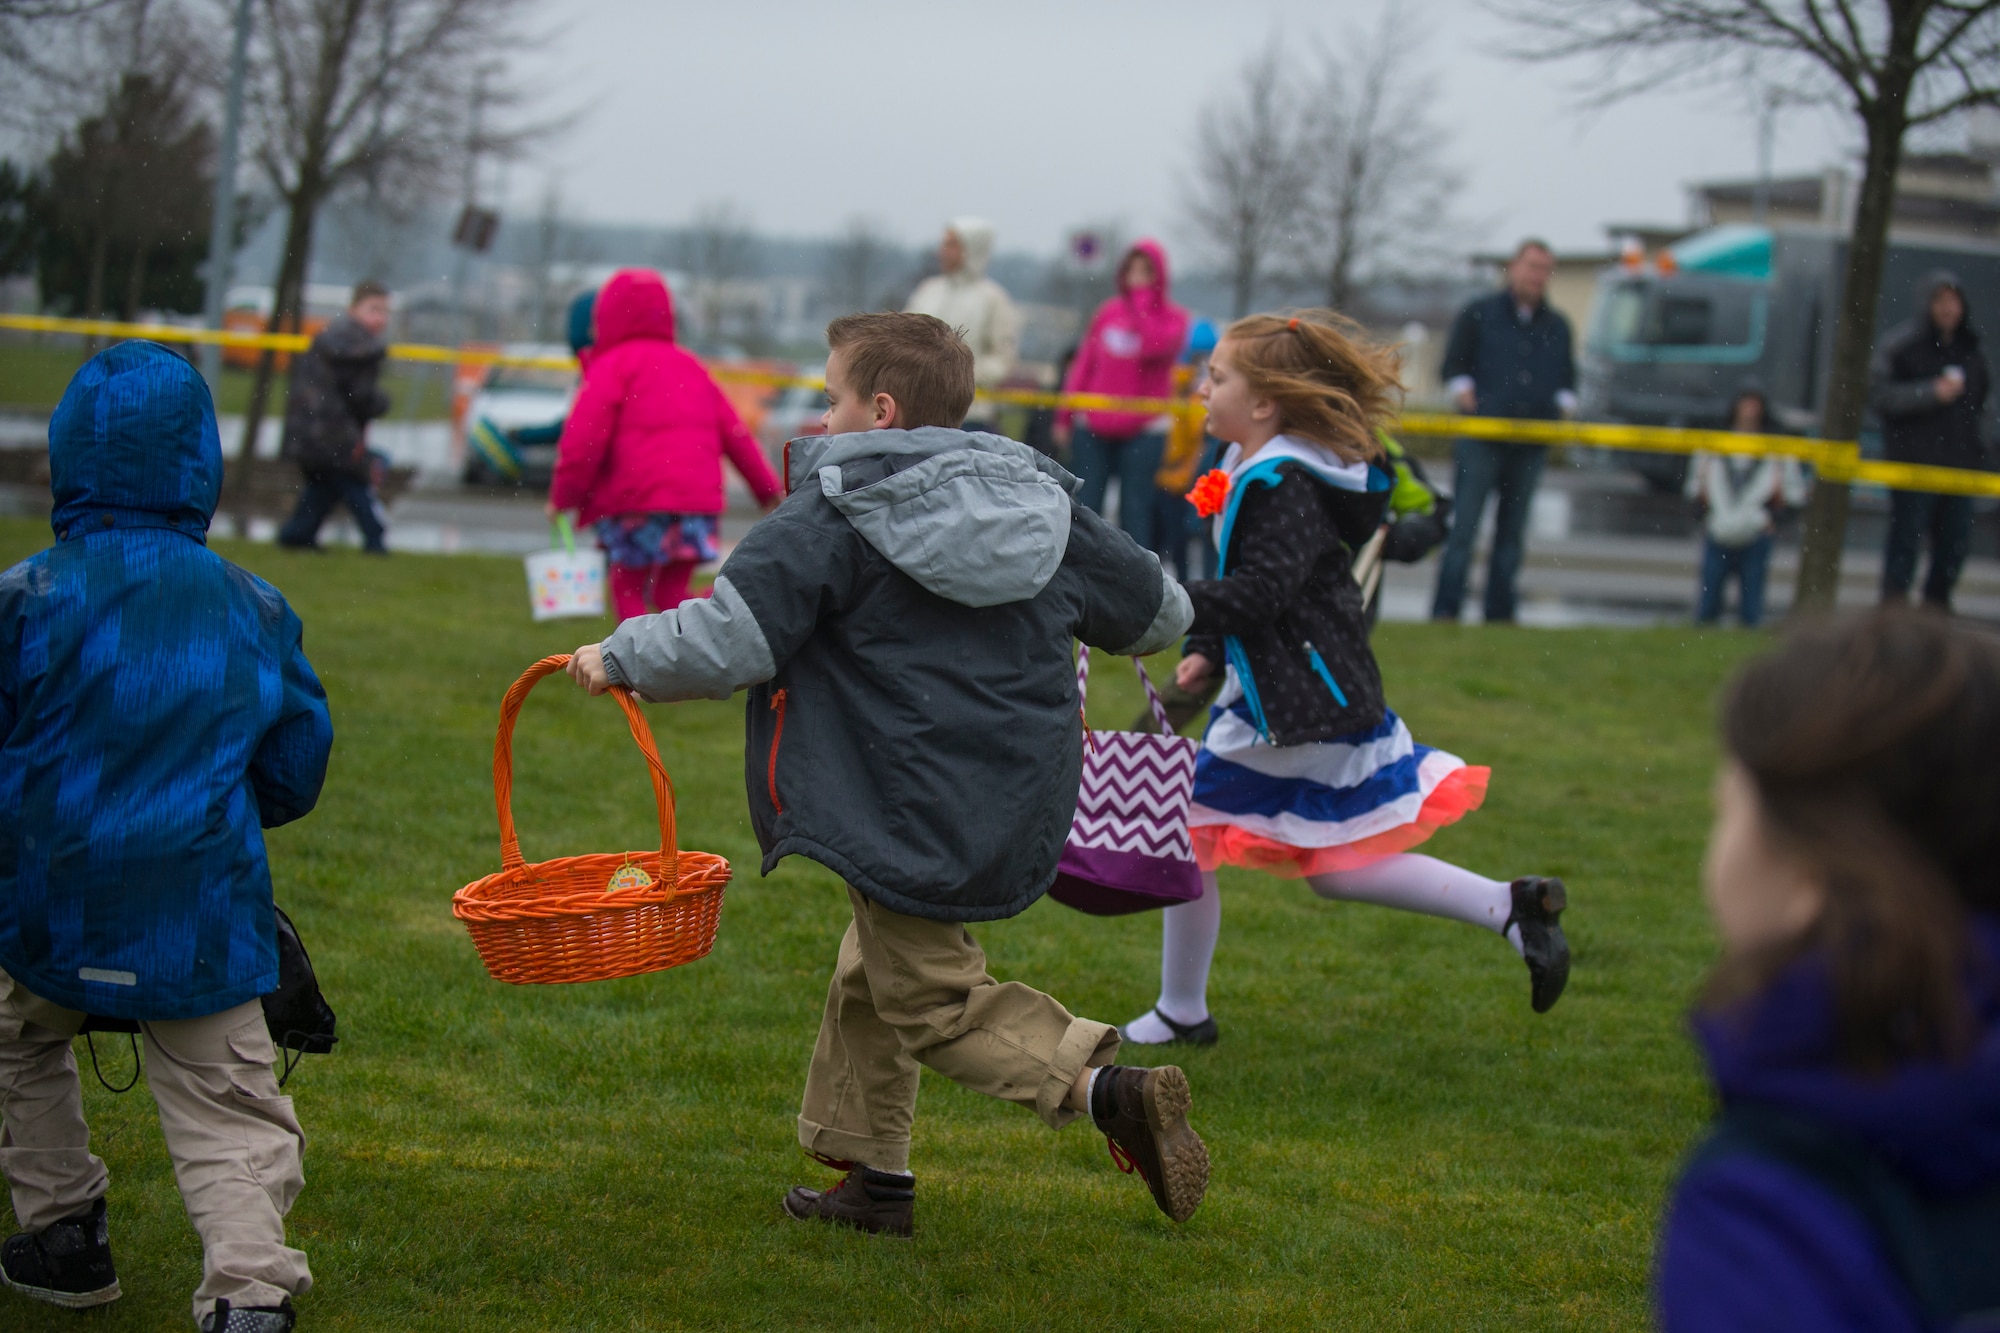 Children search for plastic eggs during an Easter egg hunt on the grass field outside Club Eifel at Spangdahlem Air Base, Germany, April 4, 2015. There were multiple egg hunts for the different age groups participating. (U.S. Air Force photo by Airman 1st Class Luke Kitterman/Released)